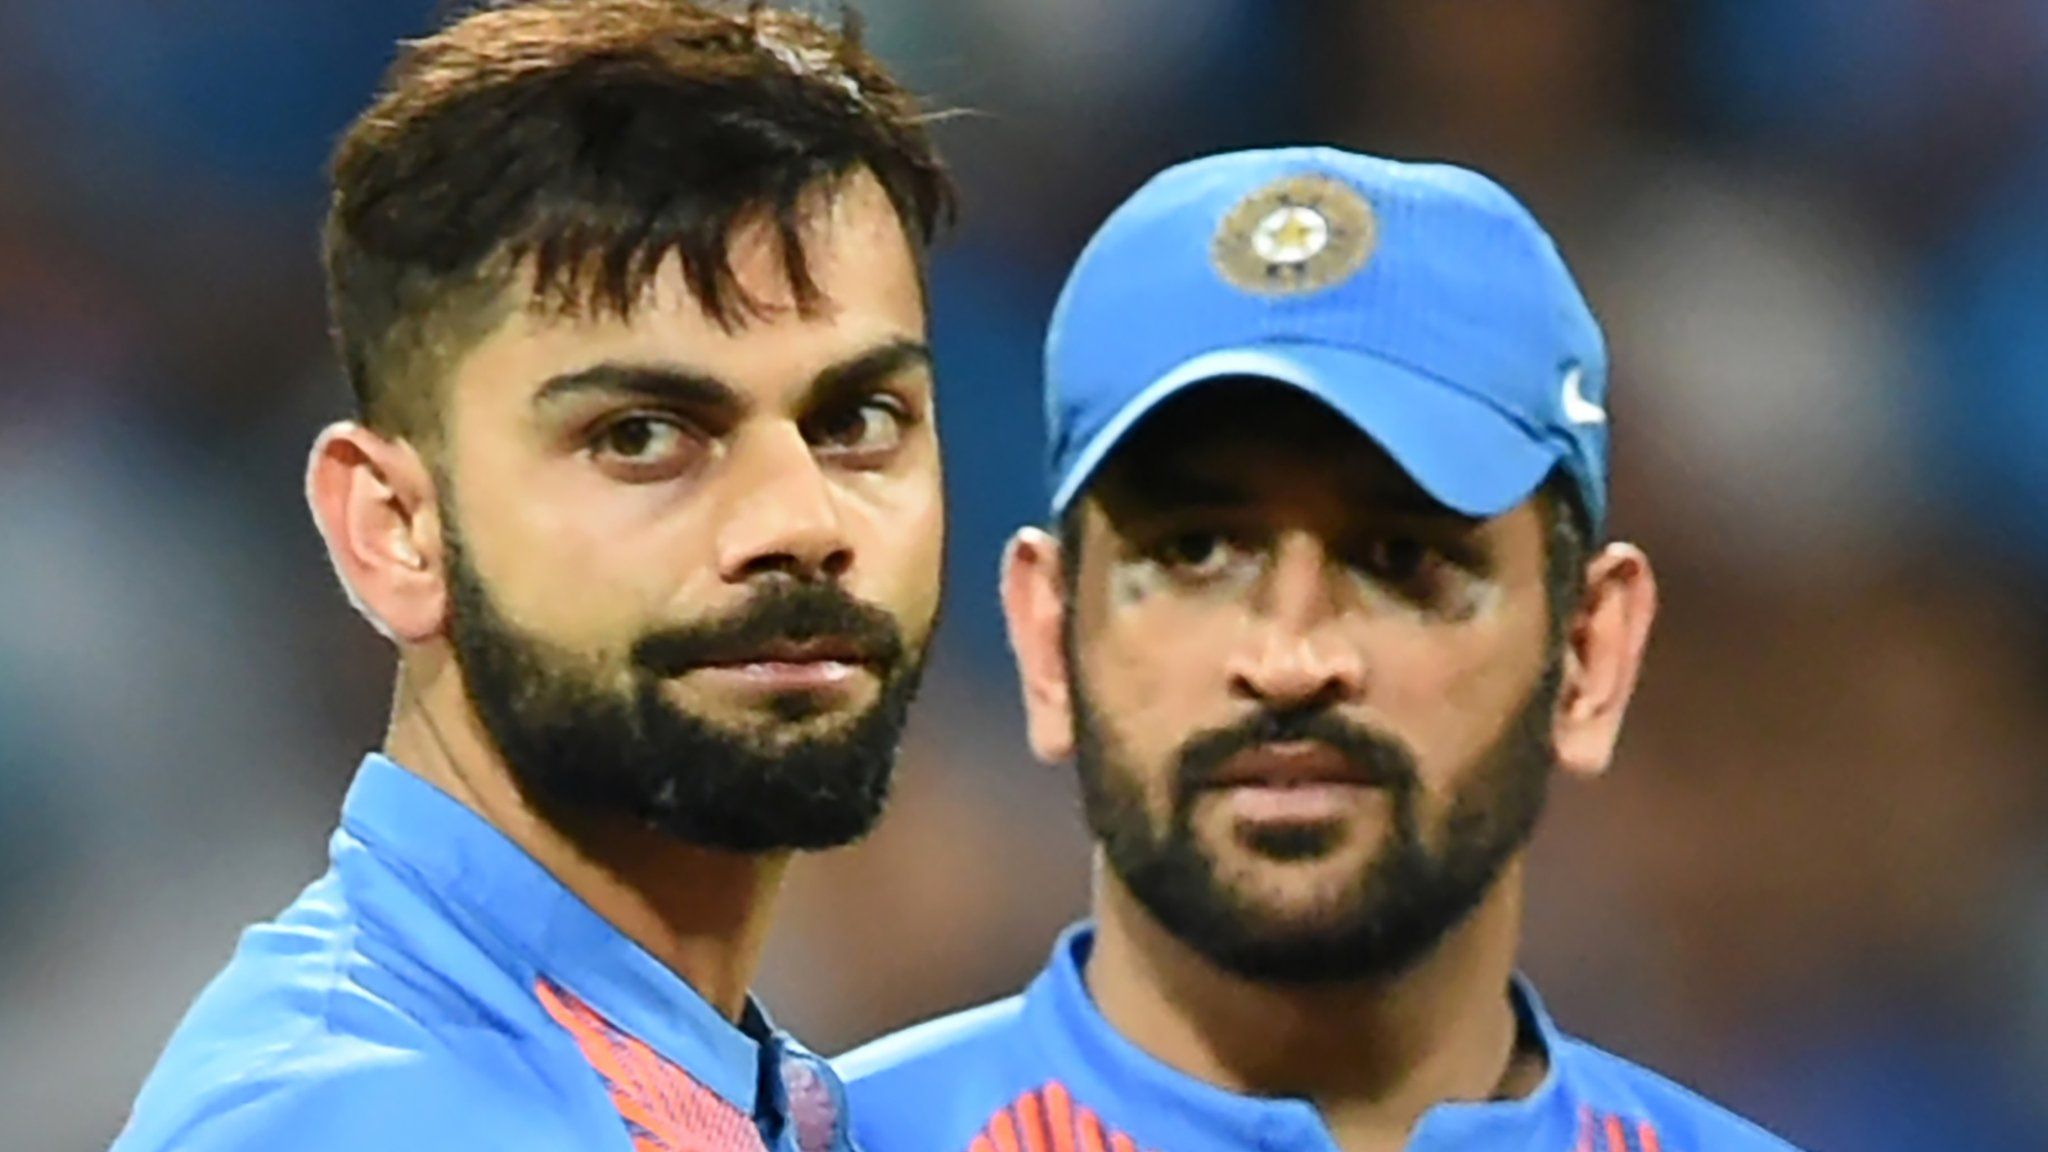 India's Virat Kohli(L)and captain Mahendra Singh Dhoni look on after defeat in the World T20 cricket tournament second semi-final match between India and West Indies at The Wankhede Stadium in Mumbai on March 31, 2016.